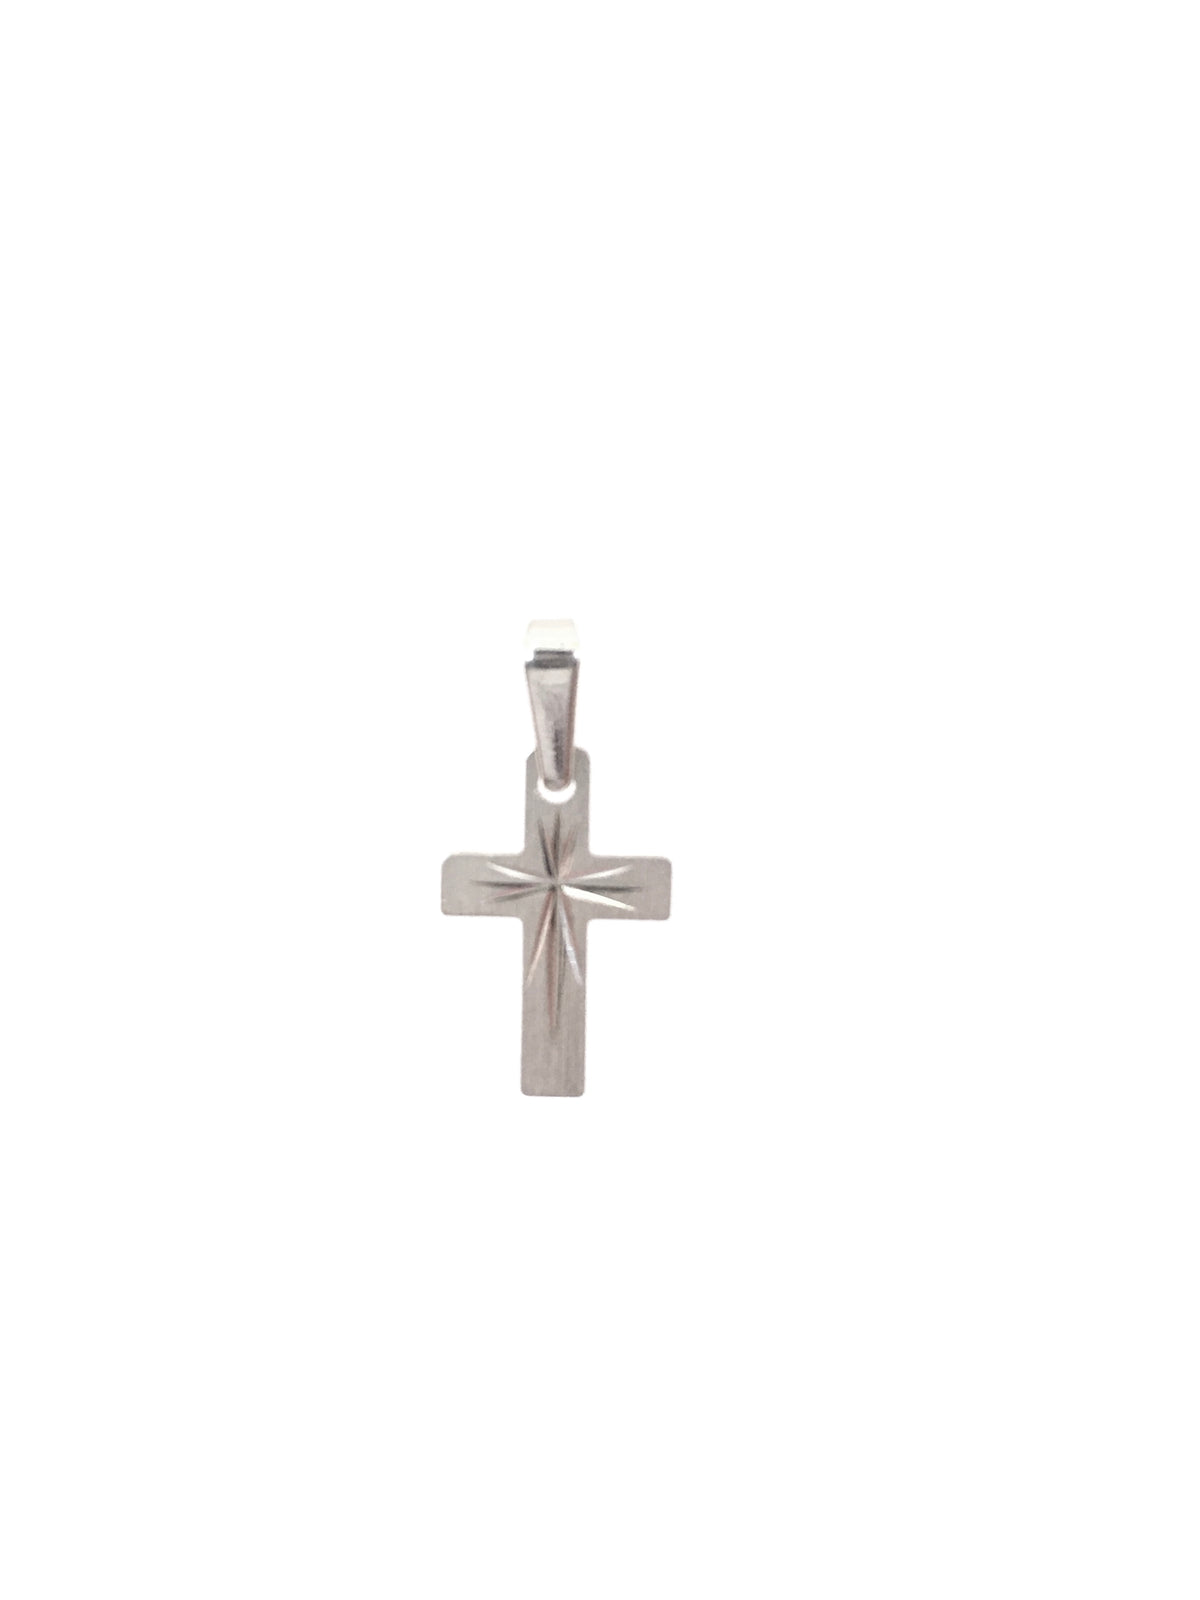 10K White Gold with Etched Center Cross Charm - 16mm x 10mm